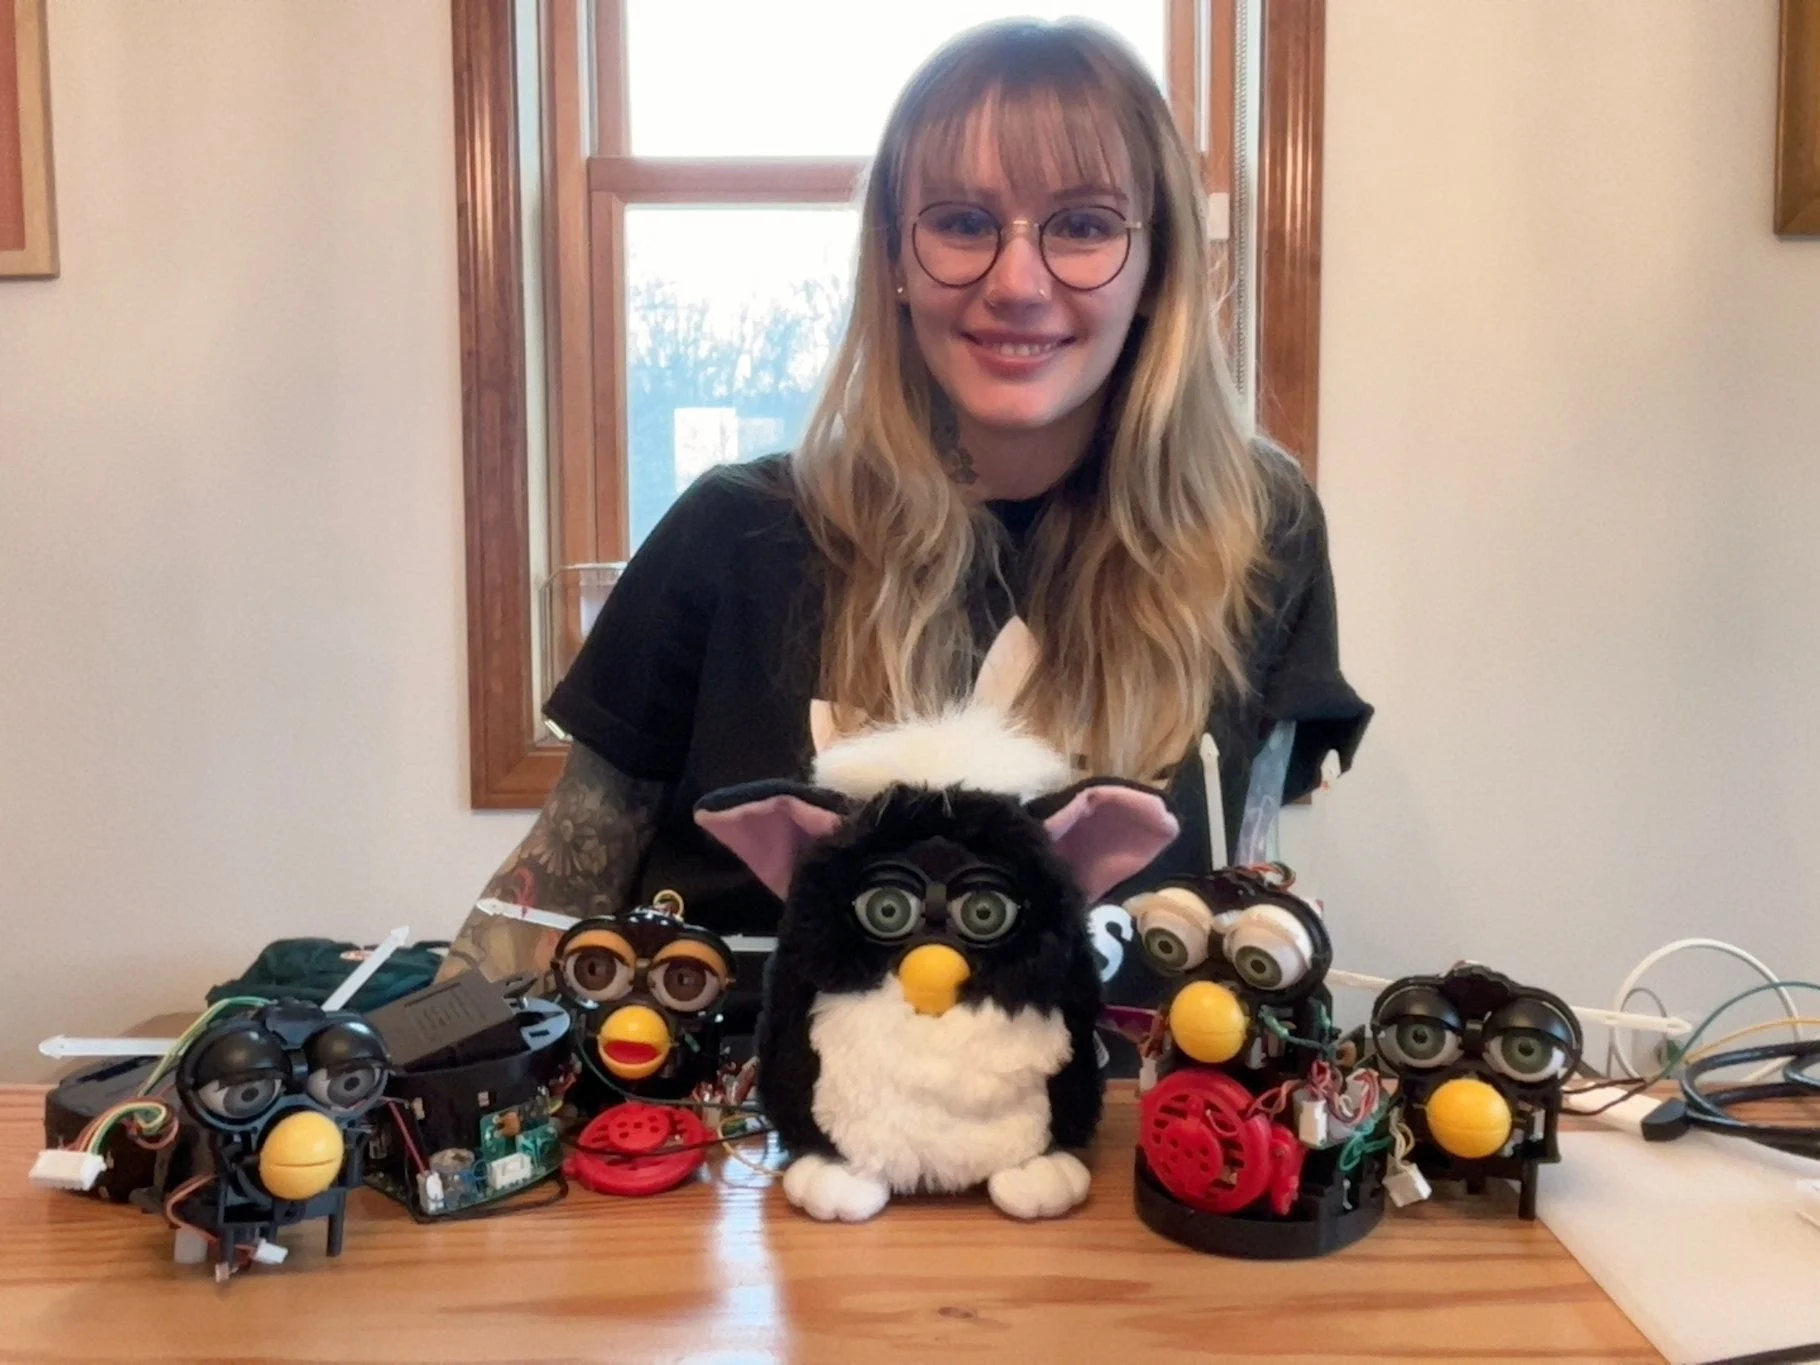 Programmer Jessica Card with her Collection of Furbies